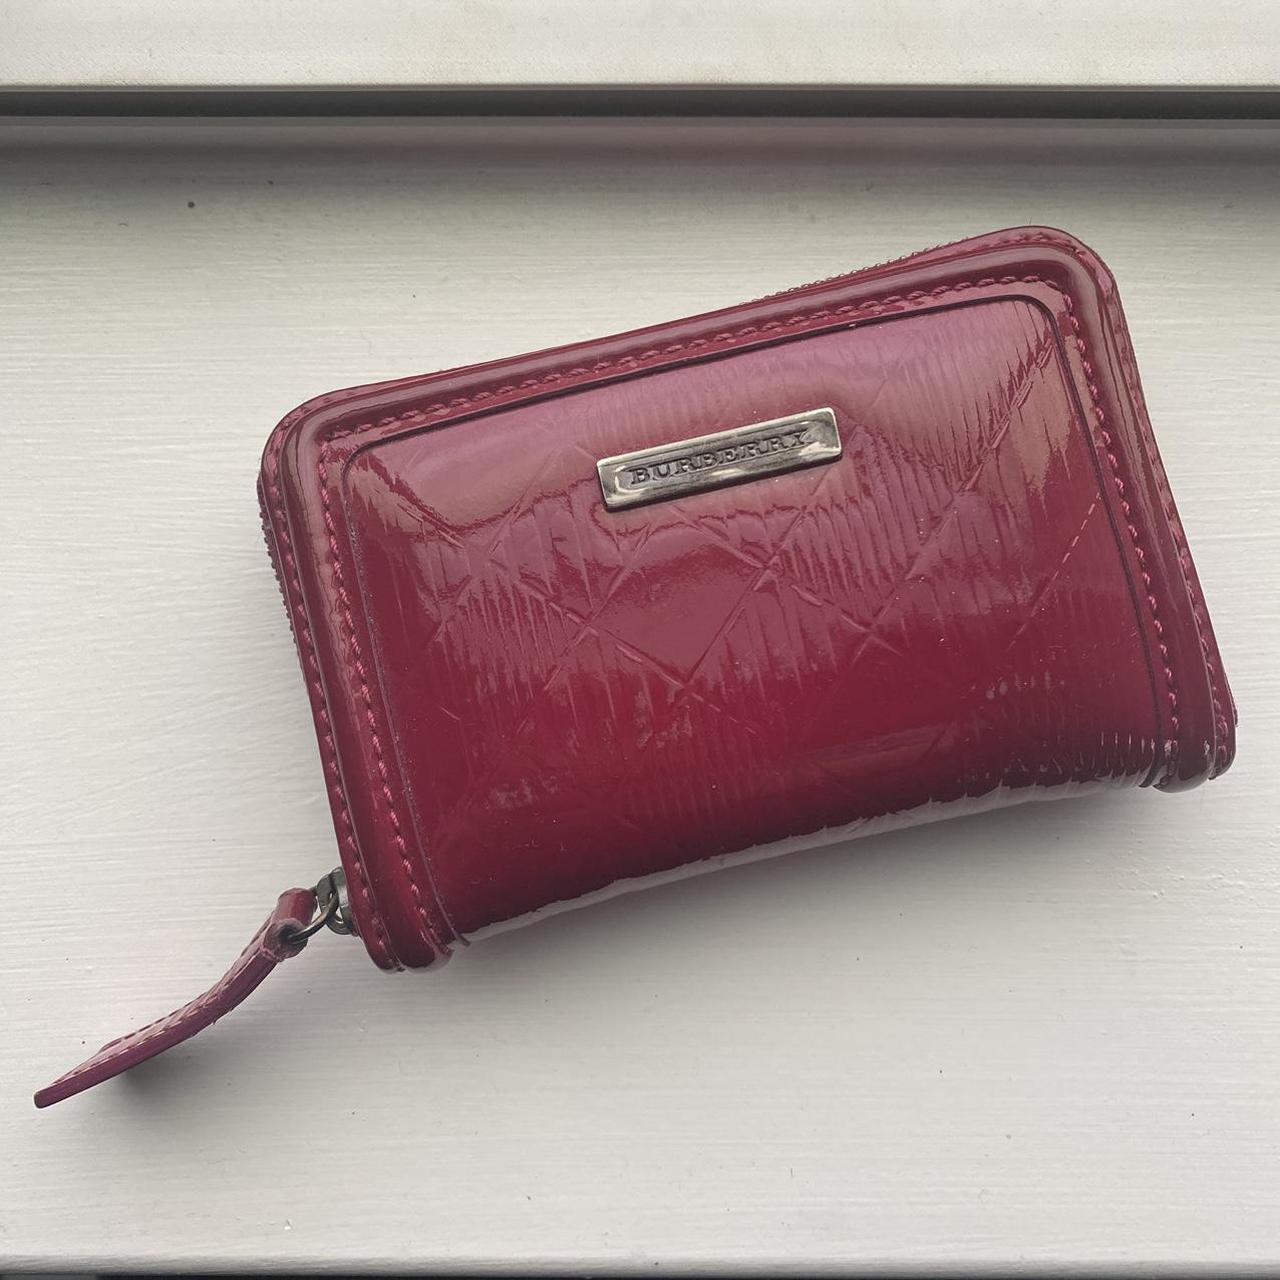 BURBERRY: wallet for women - Pink  Burberry wallet 8062369 online at